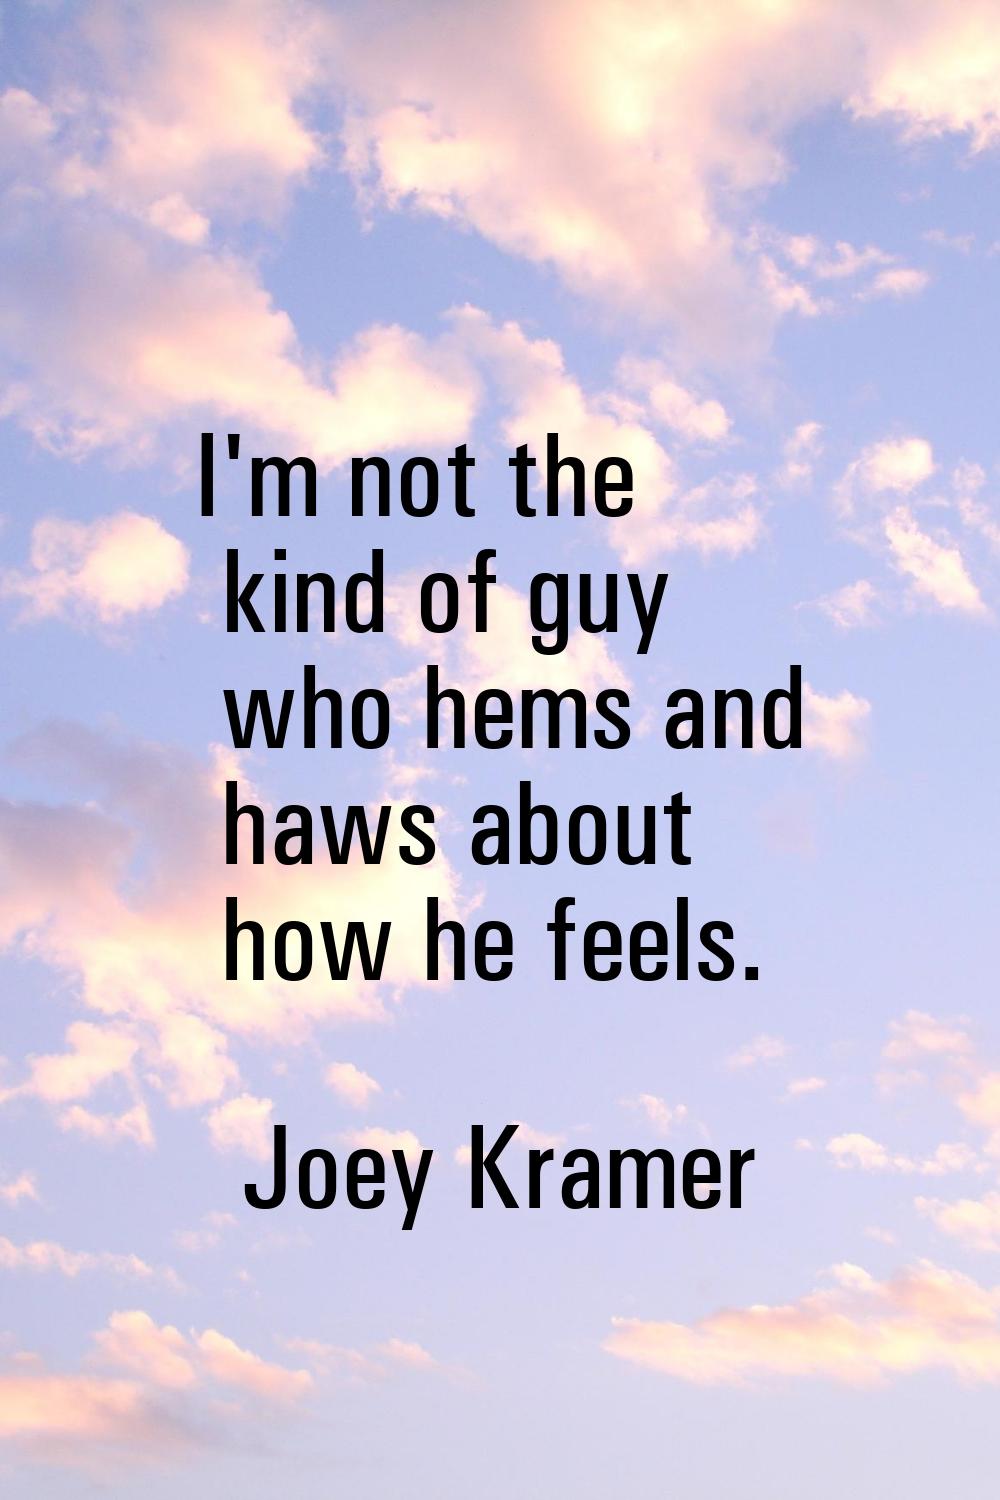 I'm not the kind of guy who hems and haws about how he feels.